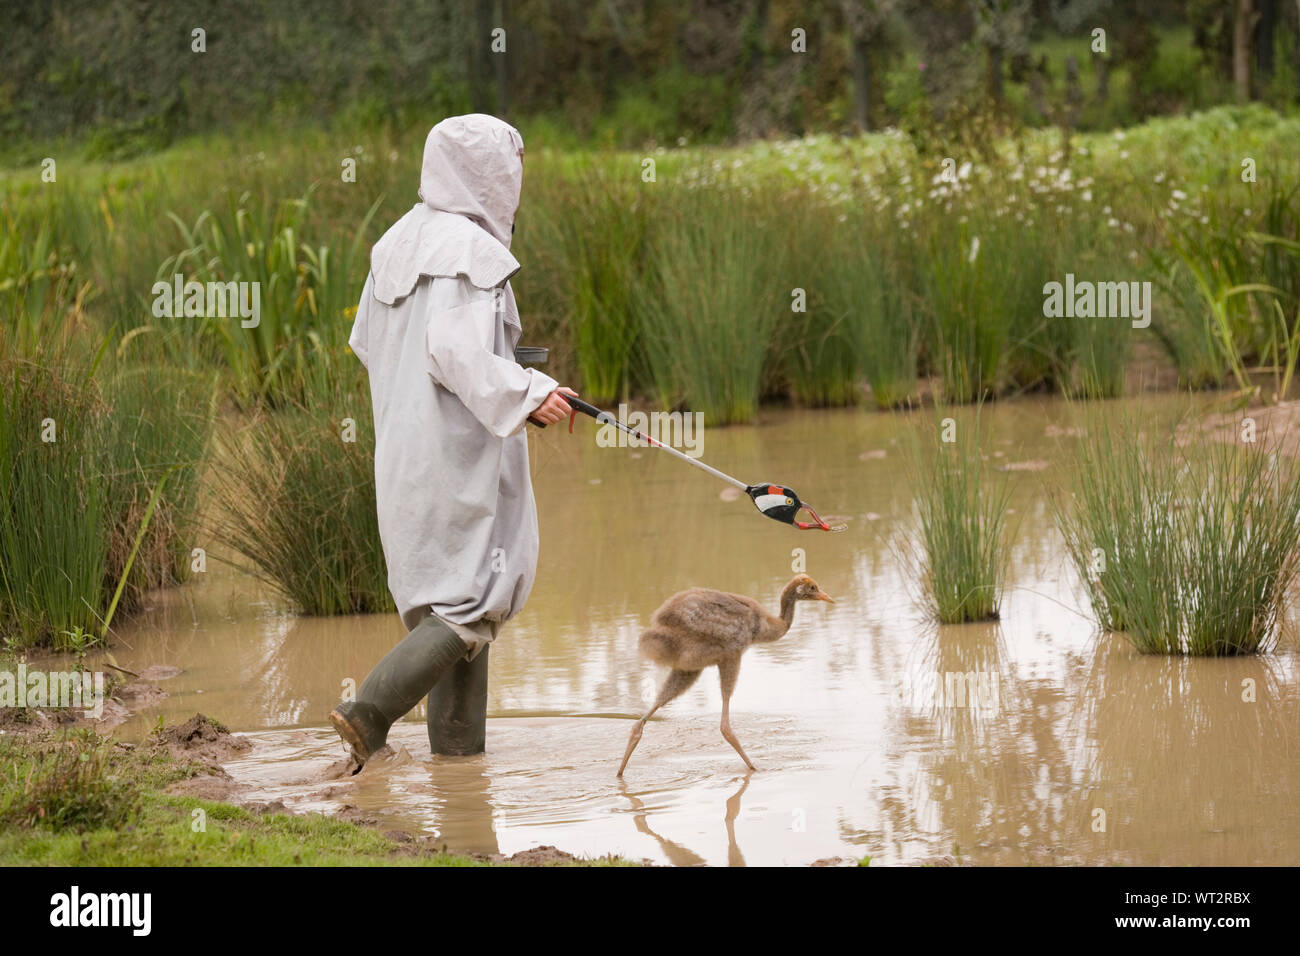 COMMON CRANE Grus grus having learnt to feed from a spoon attached to the moulded resin head of an adult on the end of a long handled litter gathering stick. Thus avoiding imprinting on human carer, wearing a disguise costume. Stock Photo